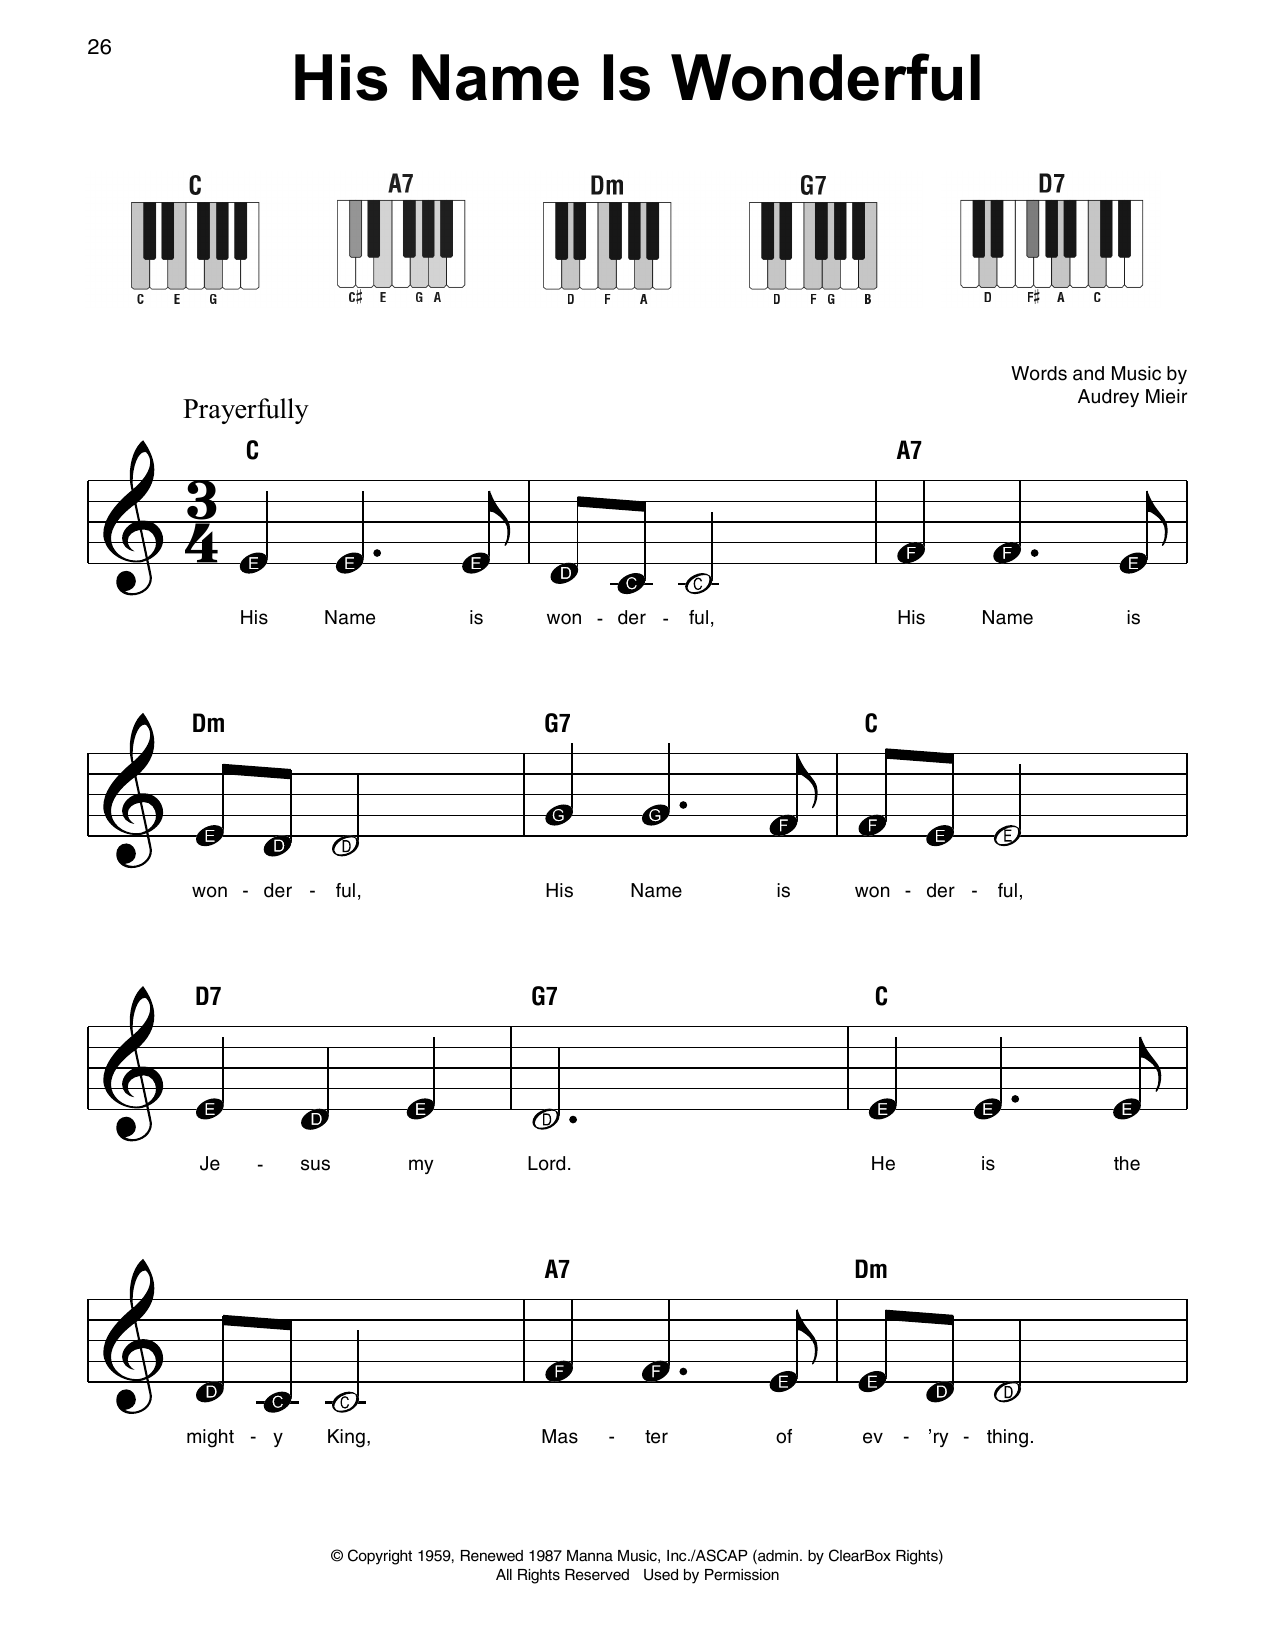 Download Audrey Mieir His Name Is Wonderful Sheet Music